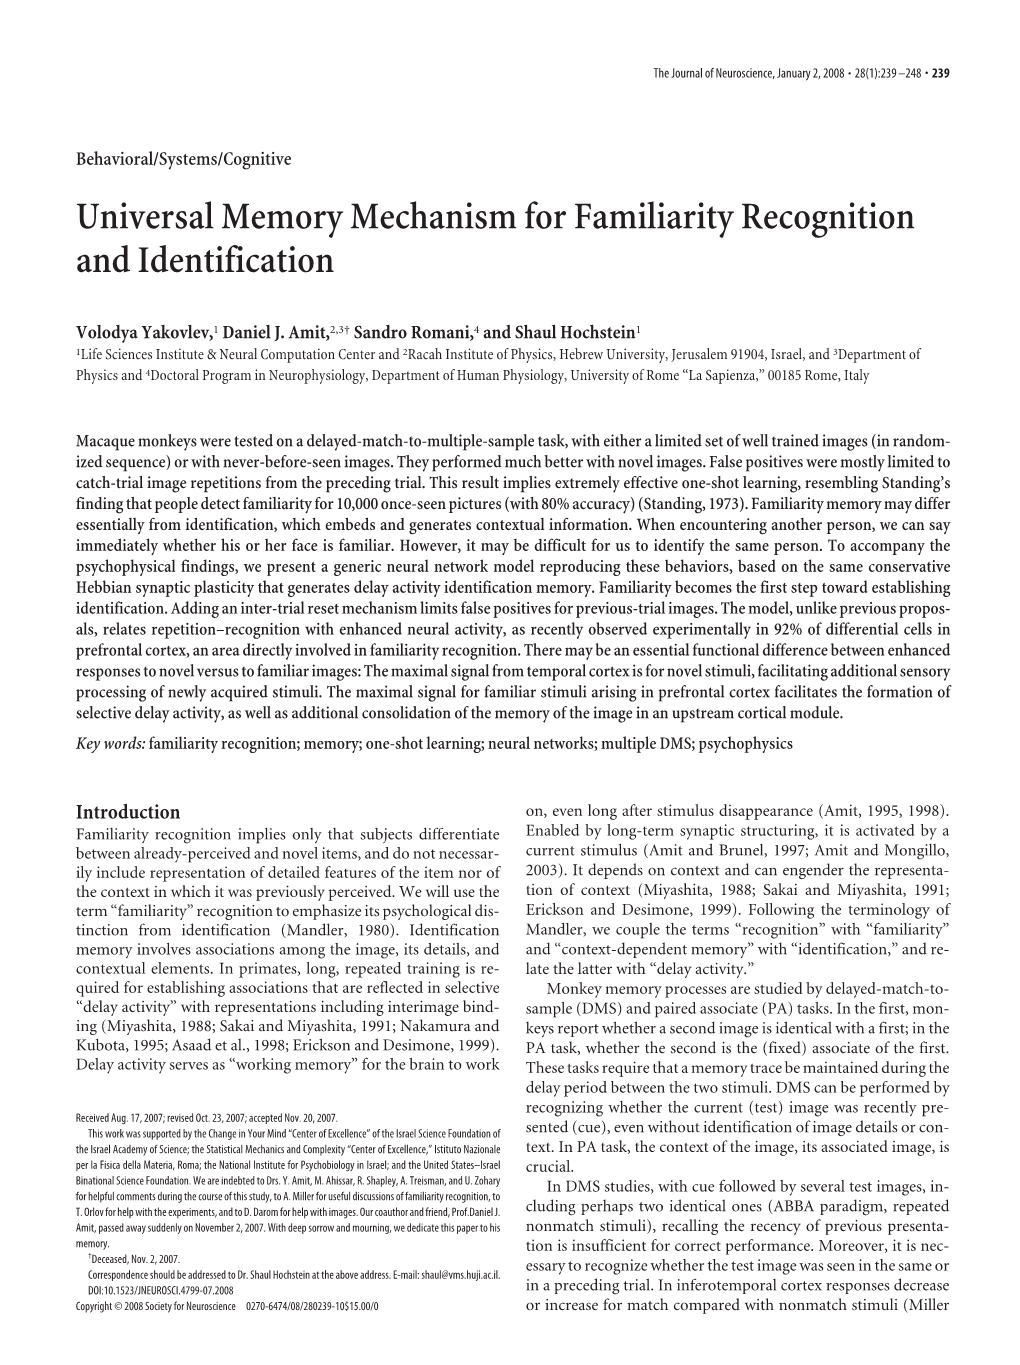 Universal Memory Mechanism for Familiarity Recognition and Identification